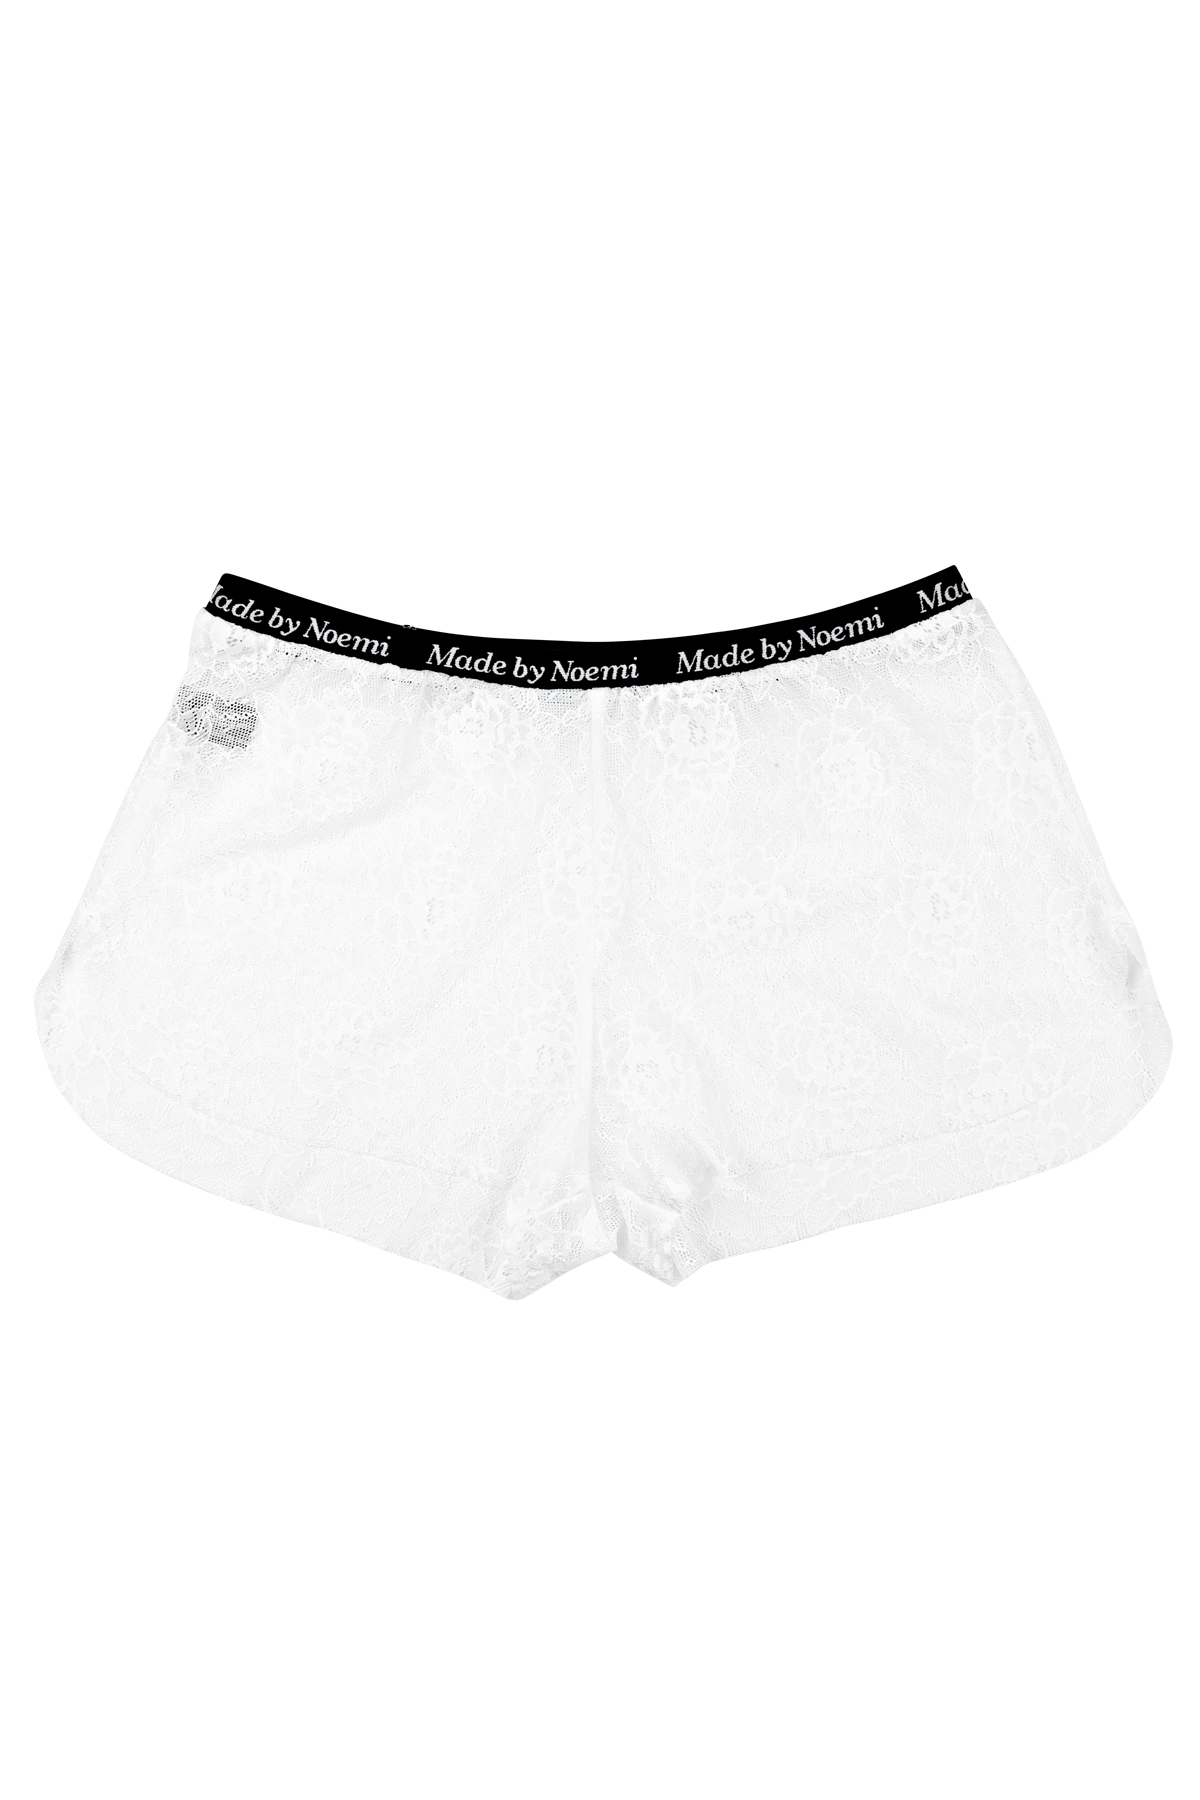 mbn_classic-line_lace_boxershorts-white_front_1200x1800